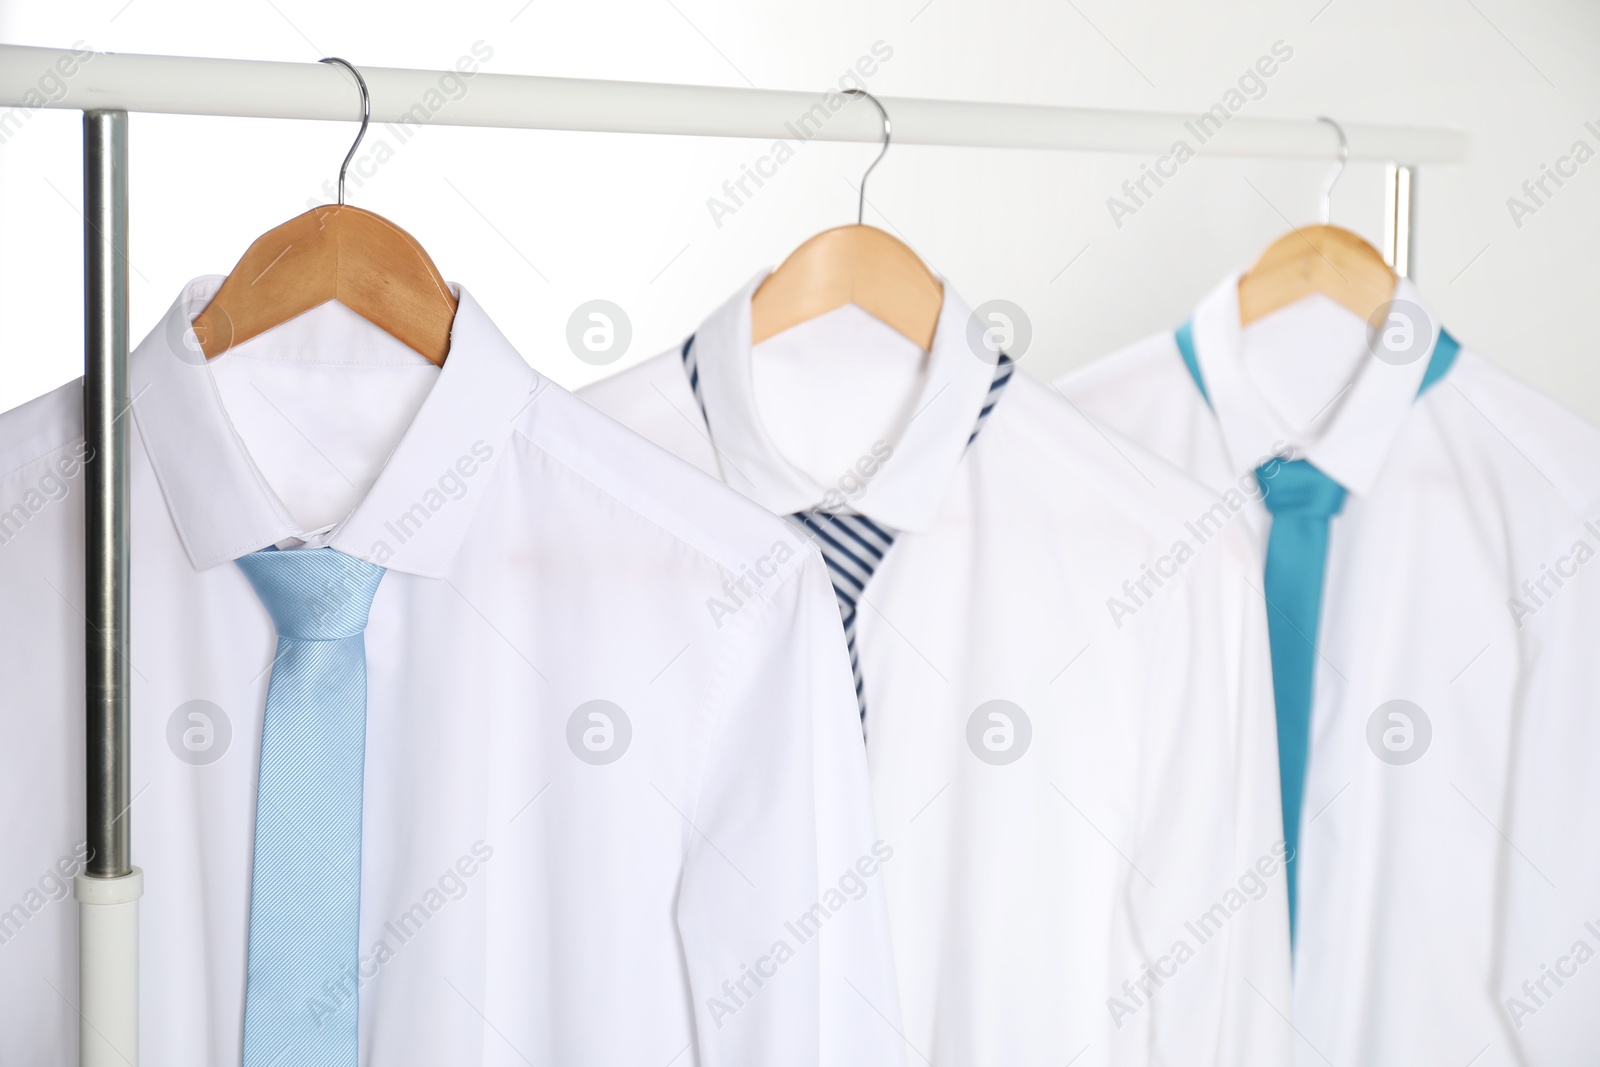 Photo of Hangers with white shirts and neckties on clothing rack against light background, closeup